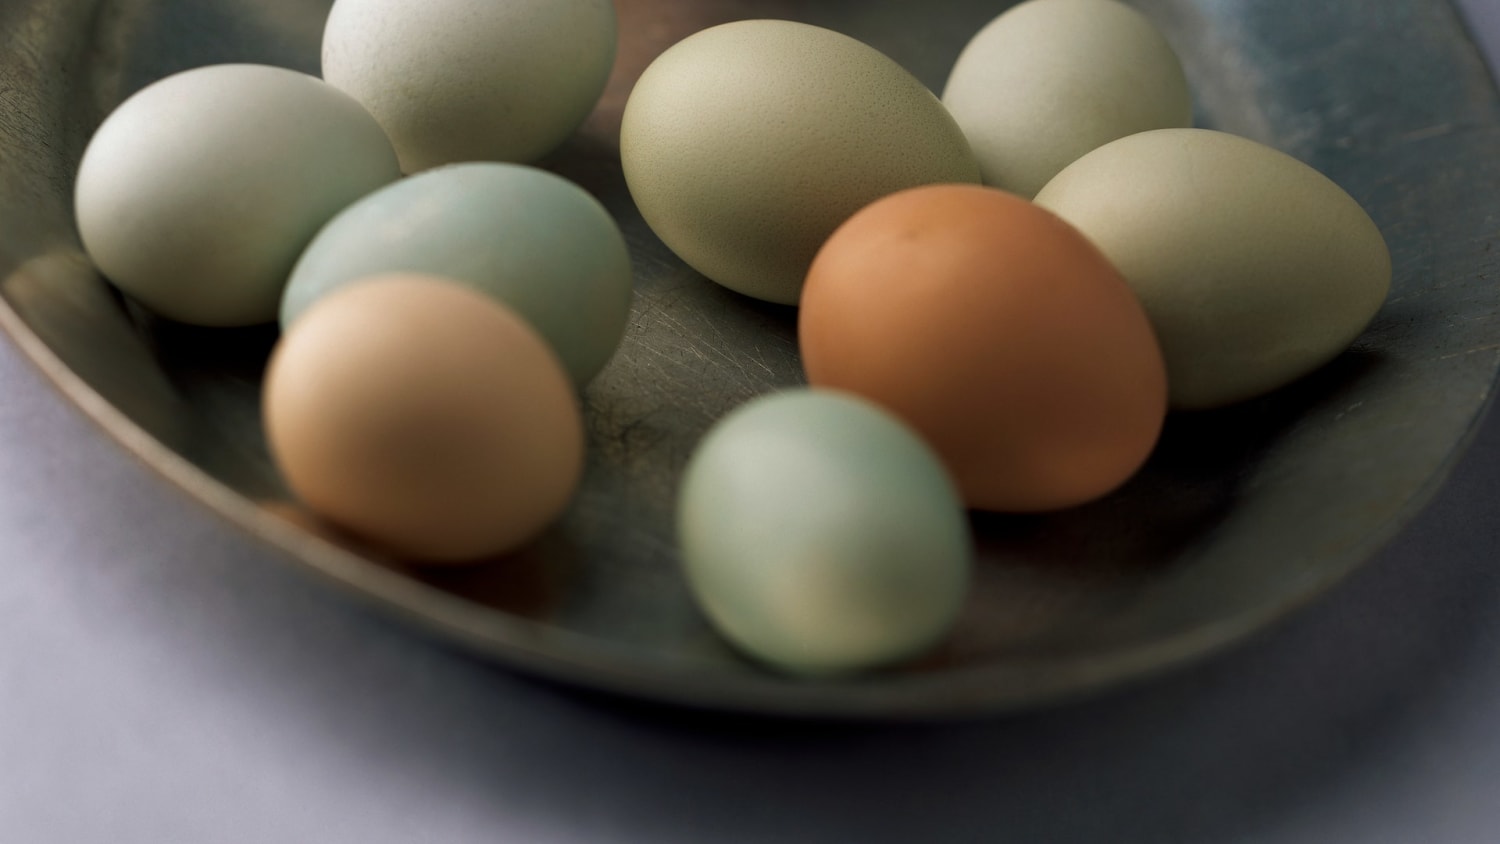 How Not To Boil An Egg, According To M.F.K. Fisher